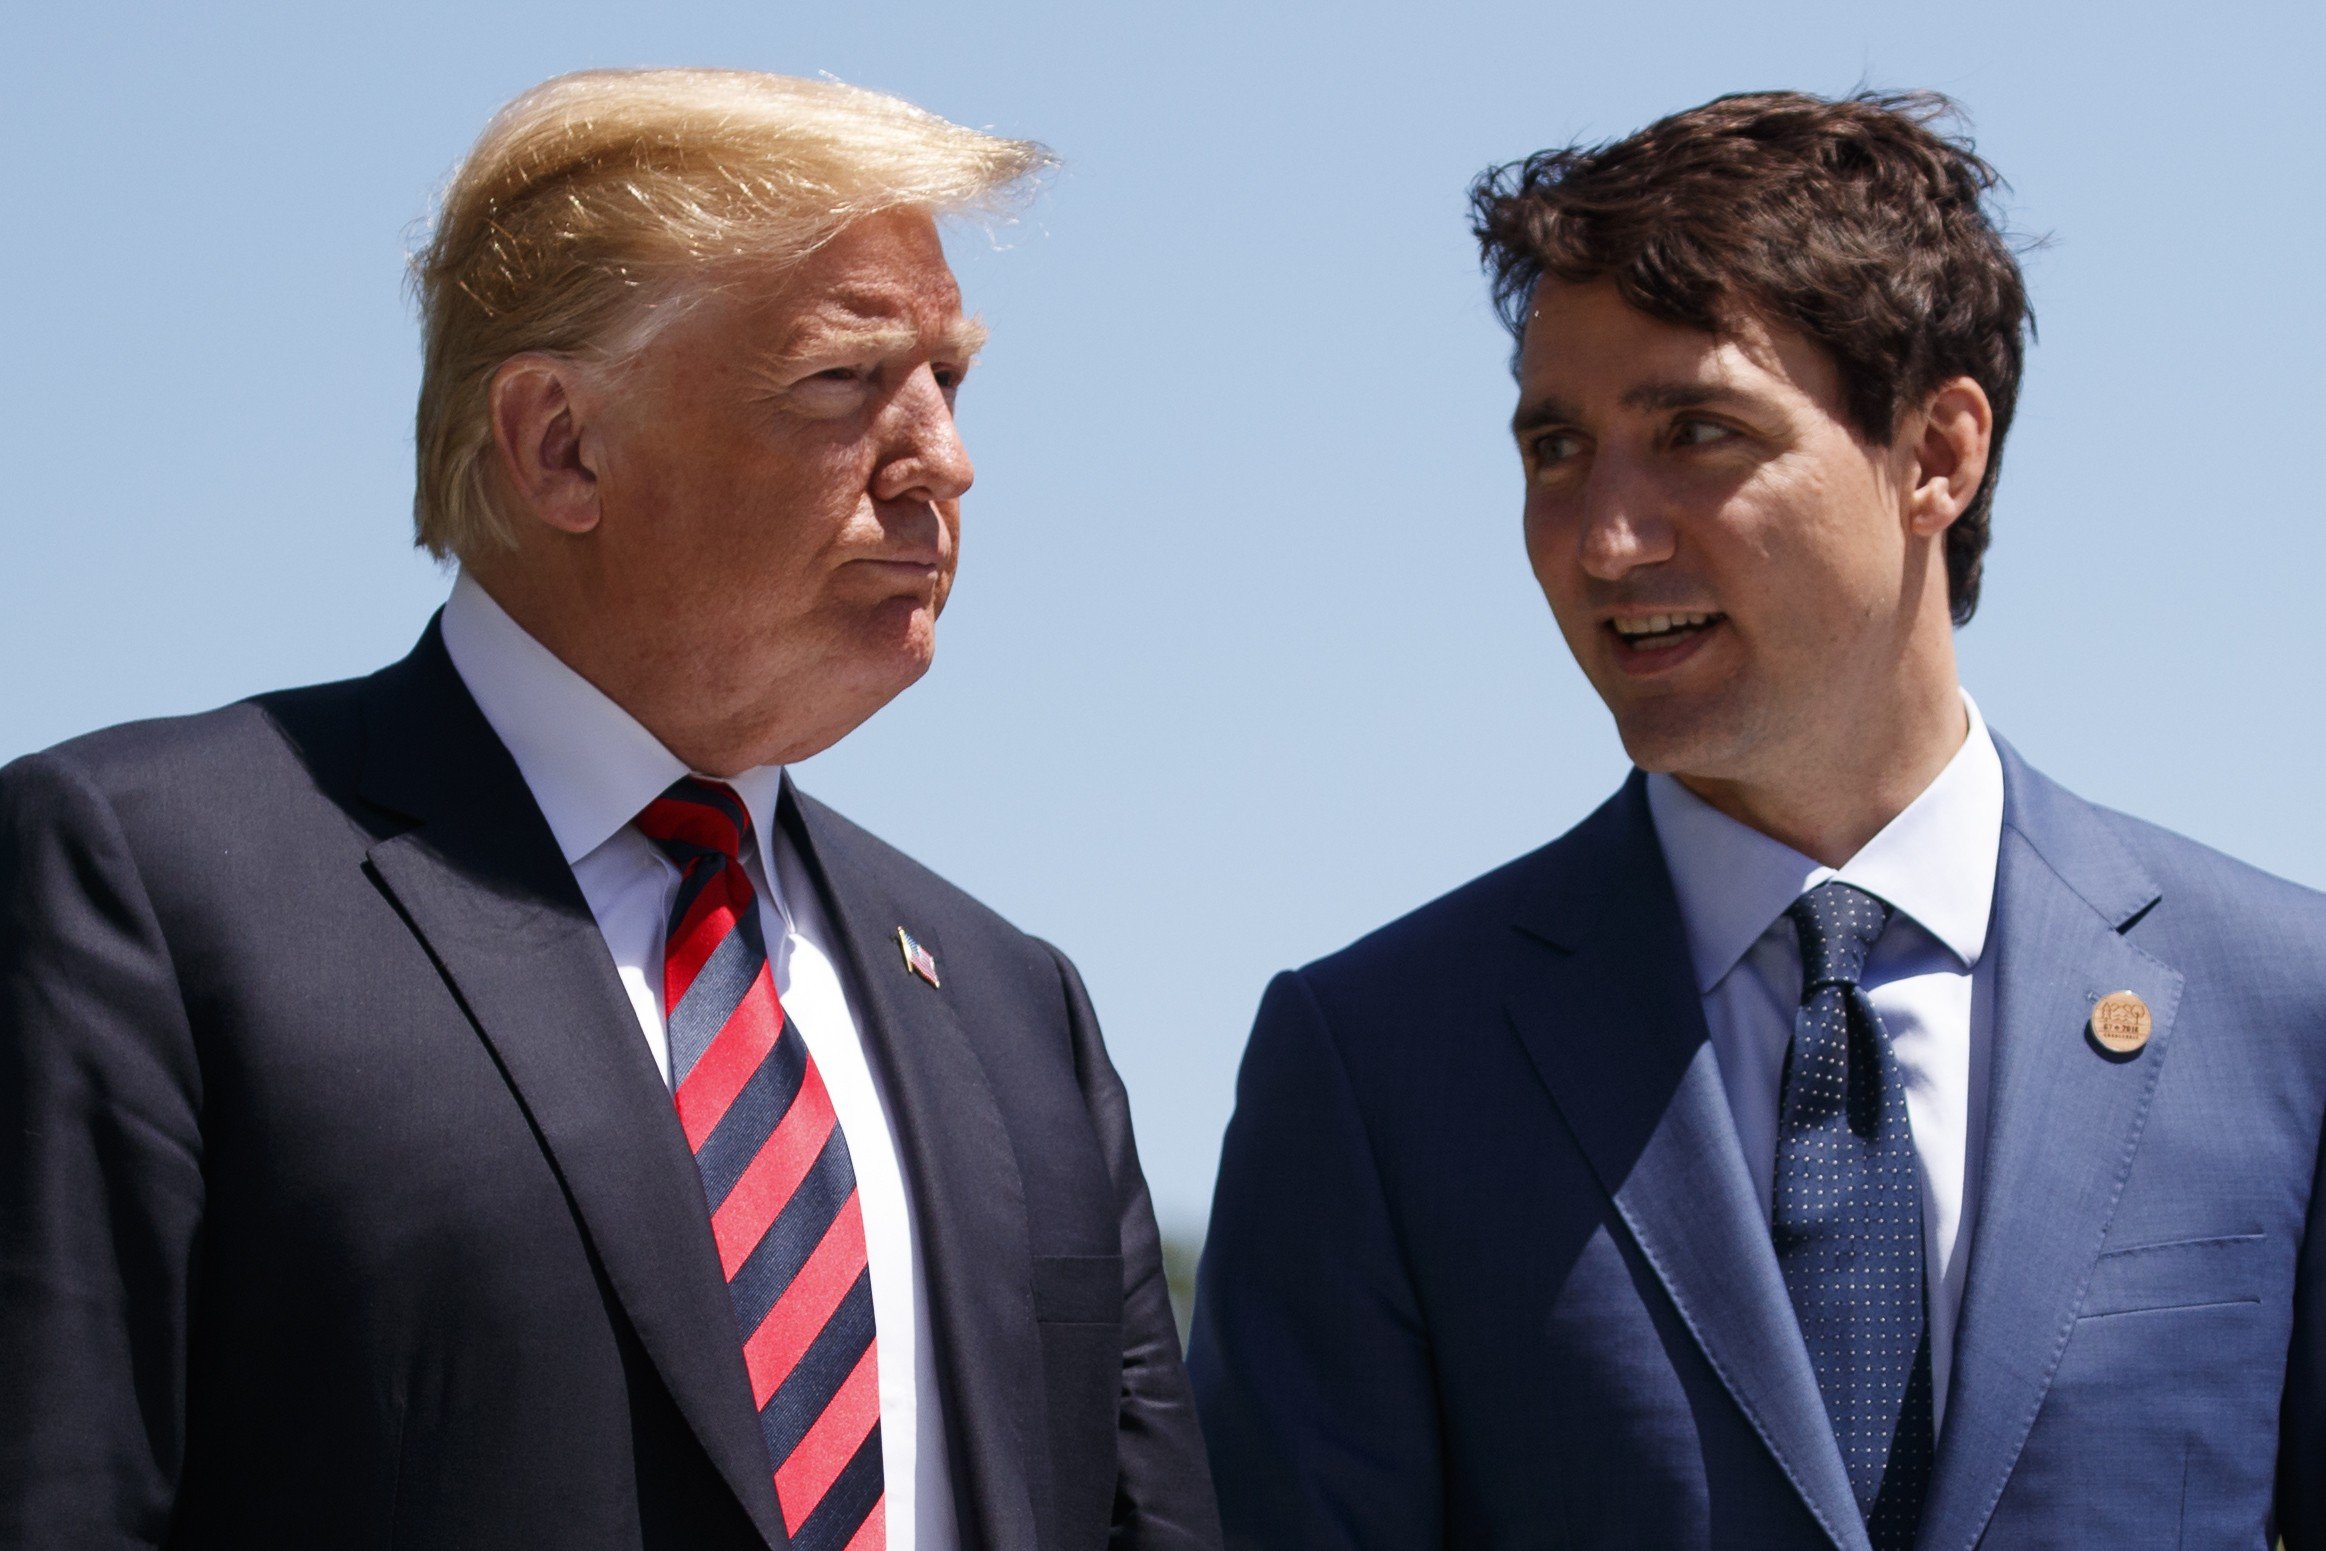 Justin Trudeau’s broad and youthful smile, compared to Donald Trump’s belligerent rhetoric, personifies and reinforces the contrast between Canada’s relatively open policy towards international students and that of the United States. Photo: AP.